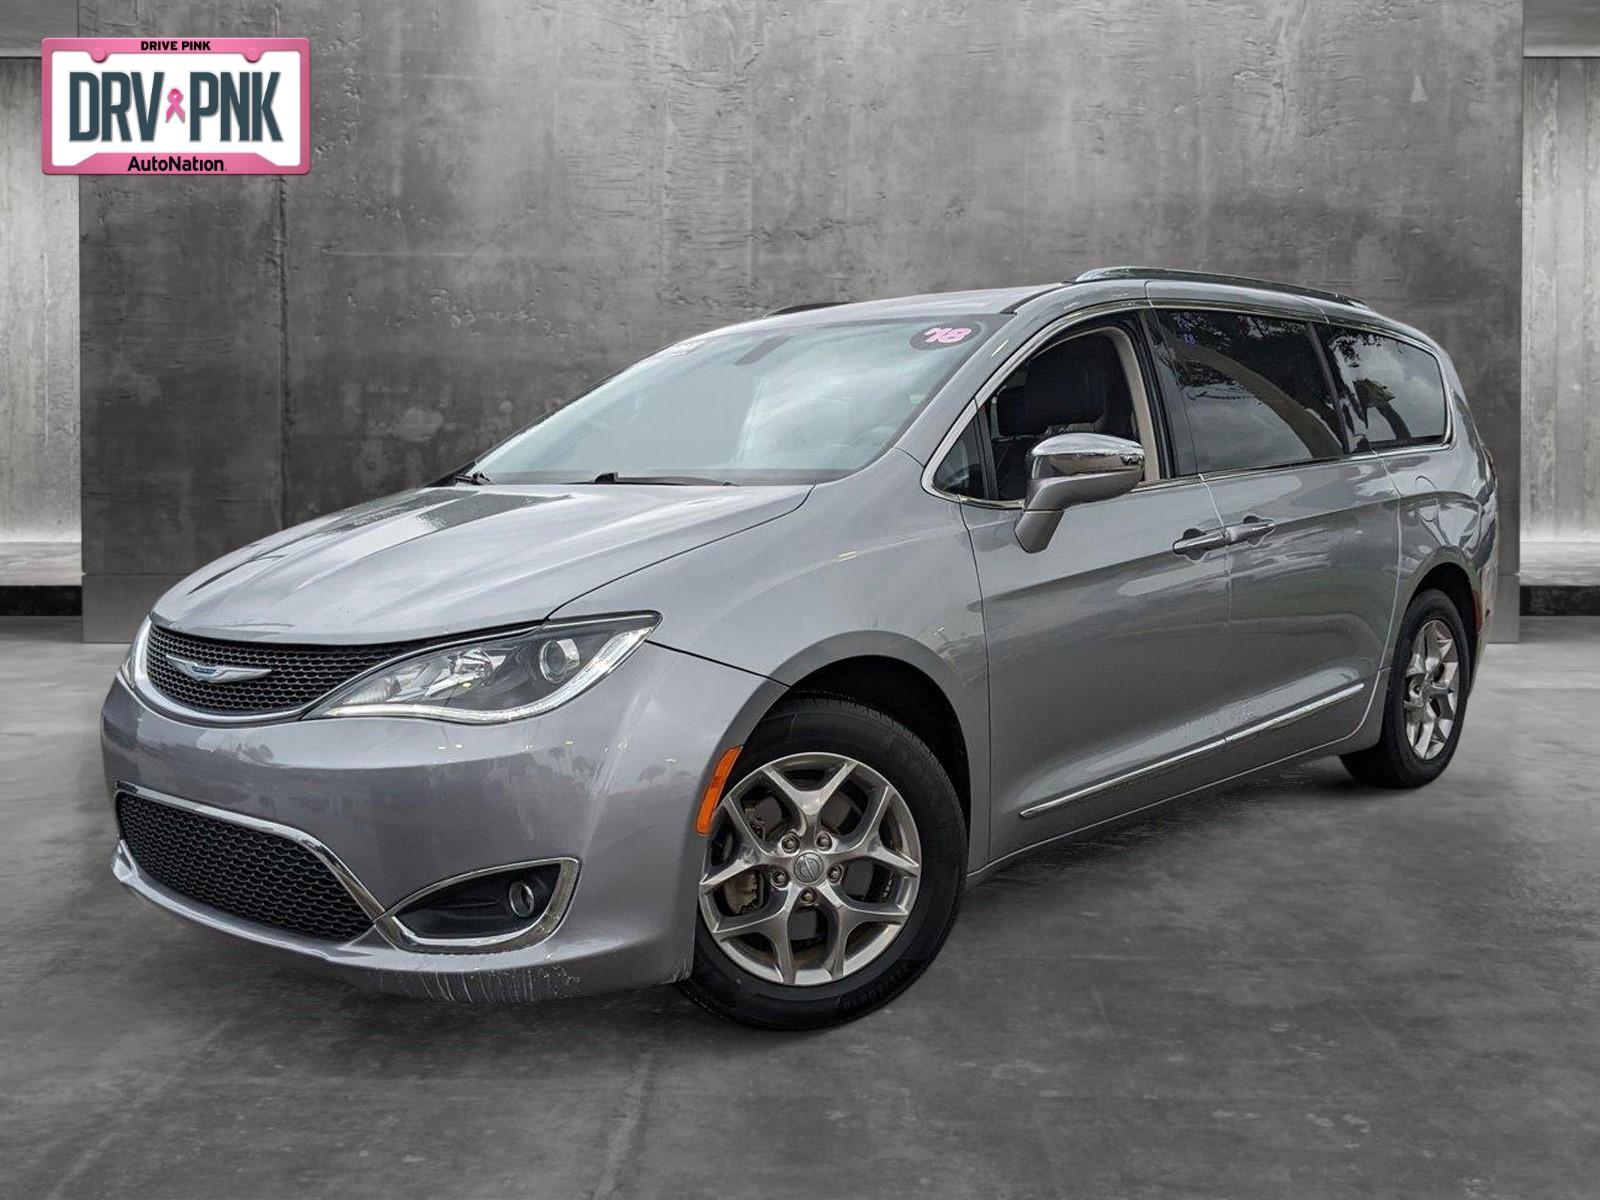 2018 Chrysler Pacifica Vehicle Photo in Winter Park, FL 32792